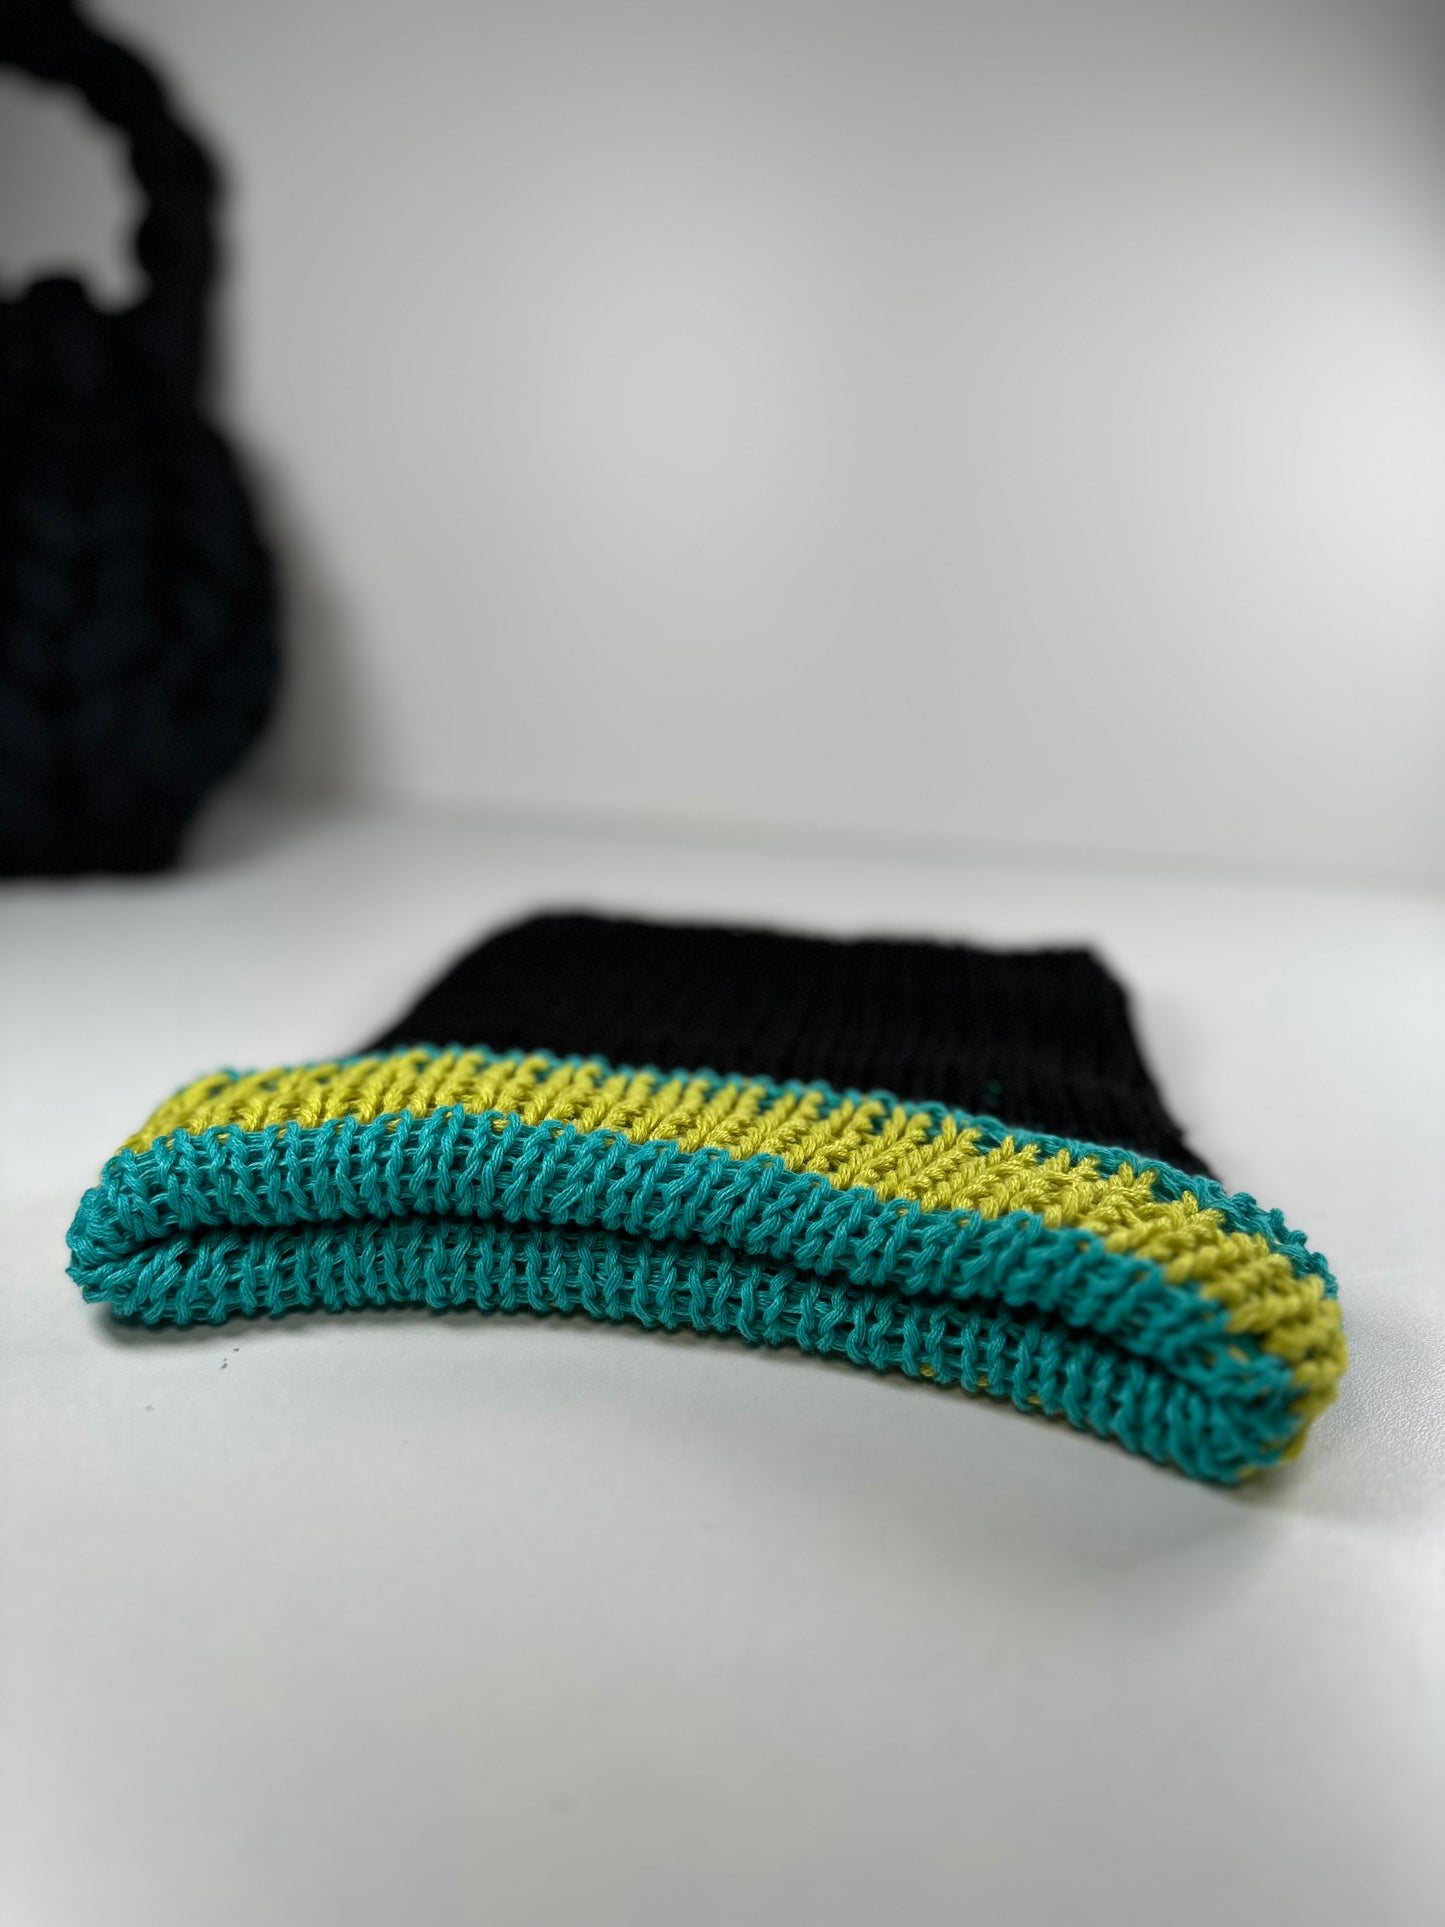 The black, turquoise, and lime green striped beanie